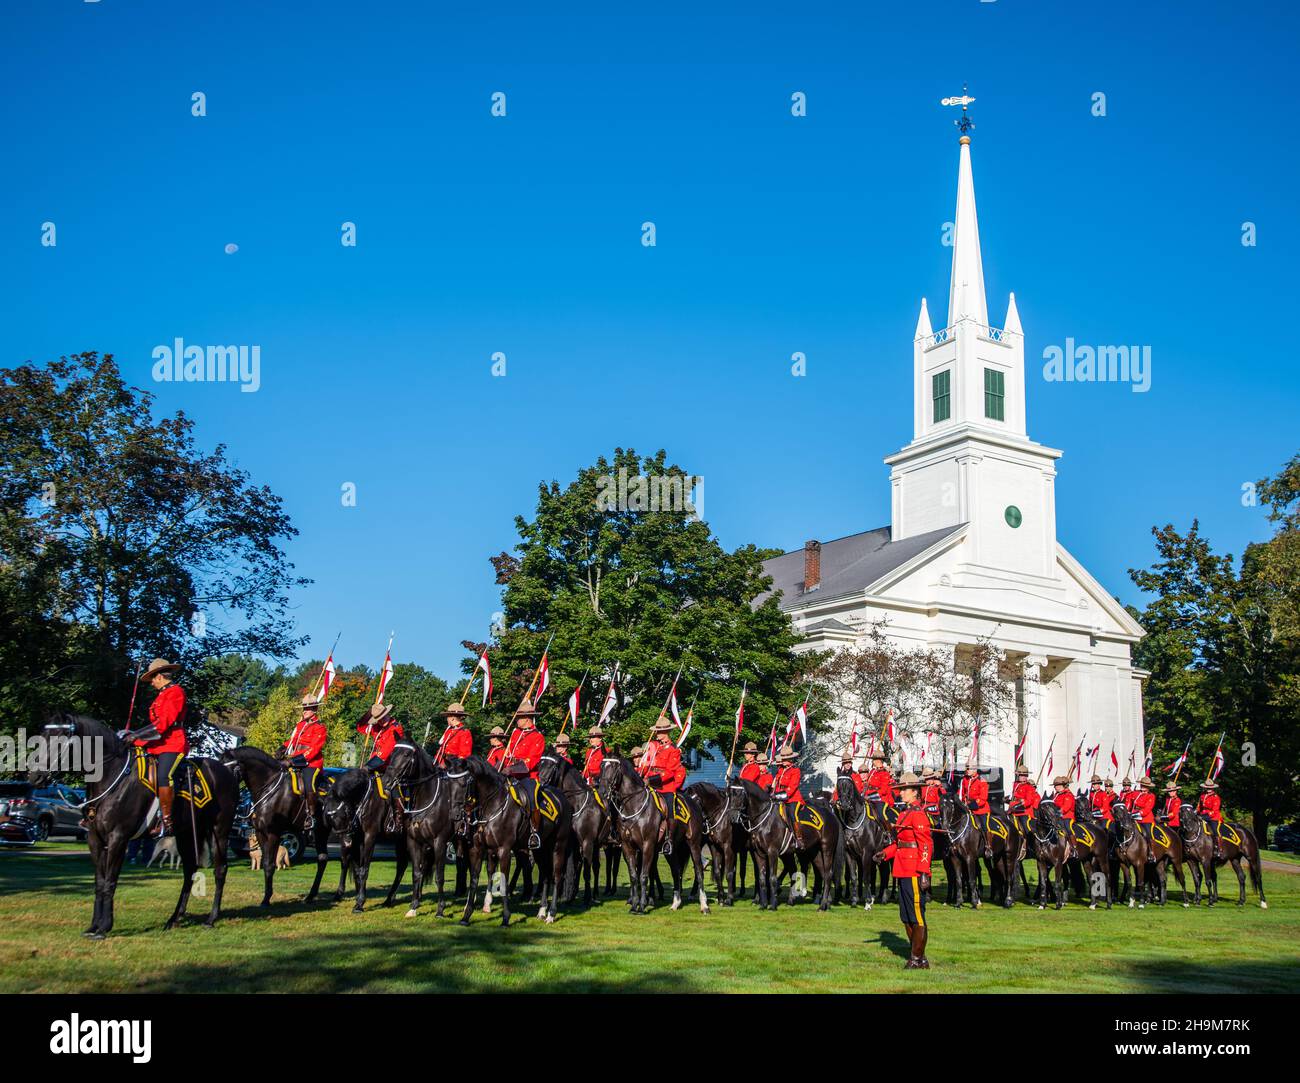 Royal Canadian Mounted Police in formation for the Topsfield Fair Parade, Topsfield, Massachusetts, USA Stock Photo